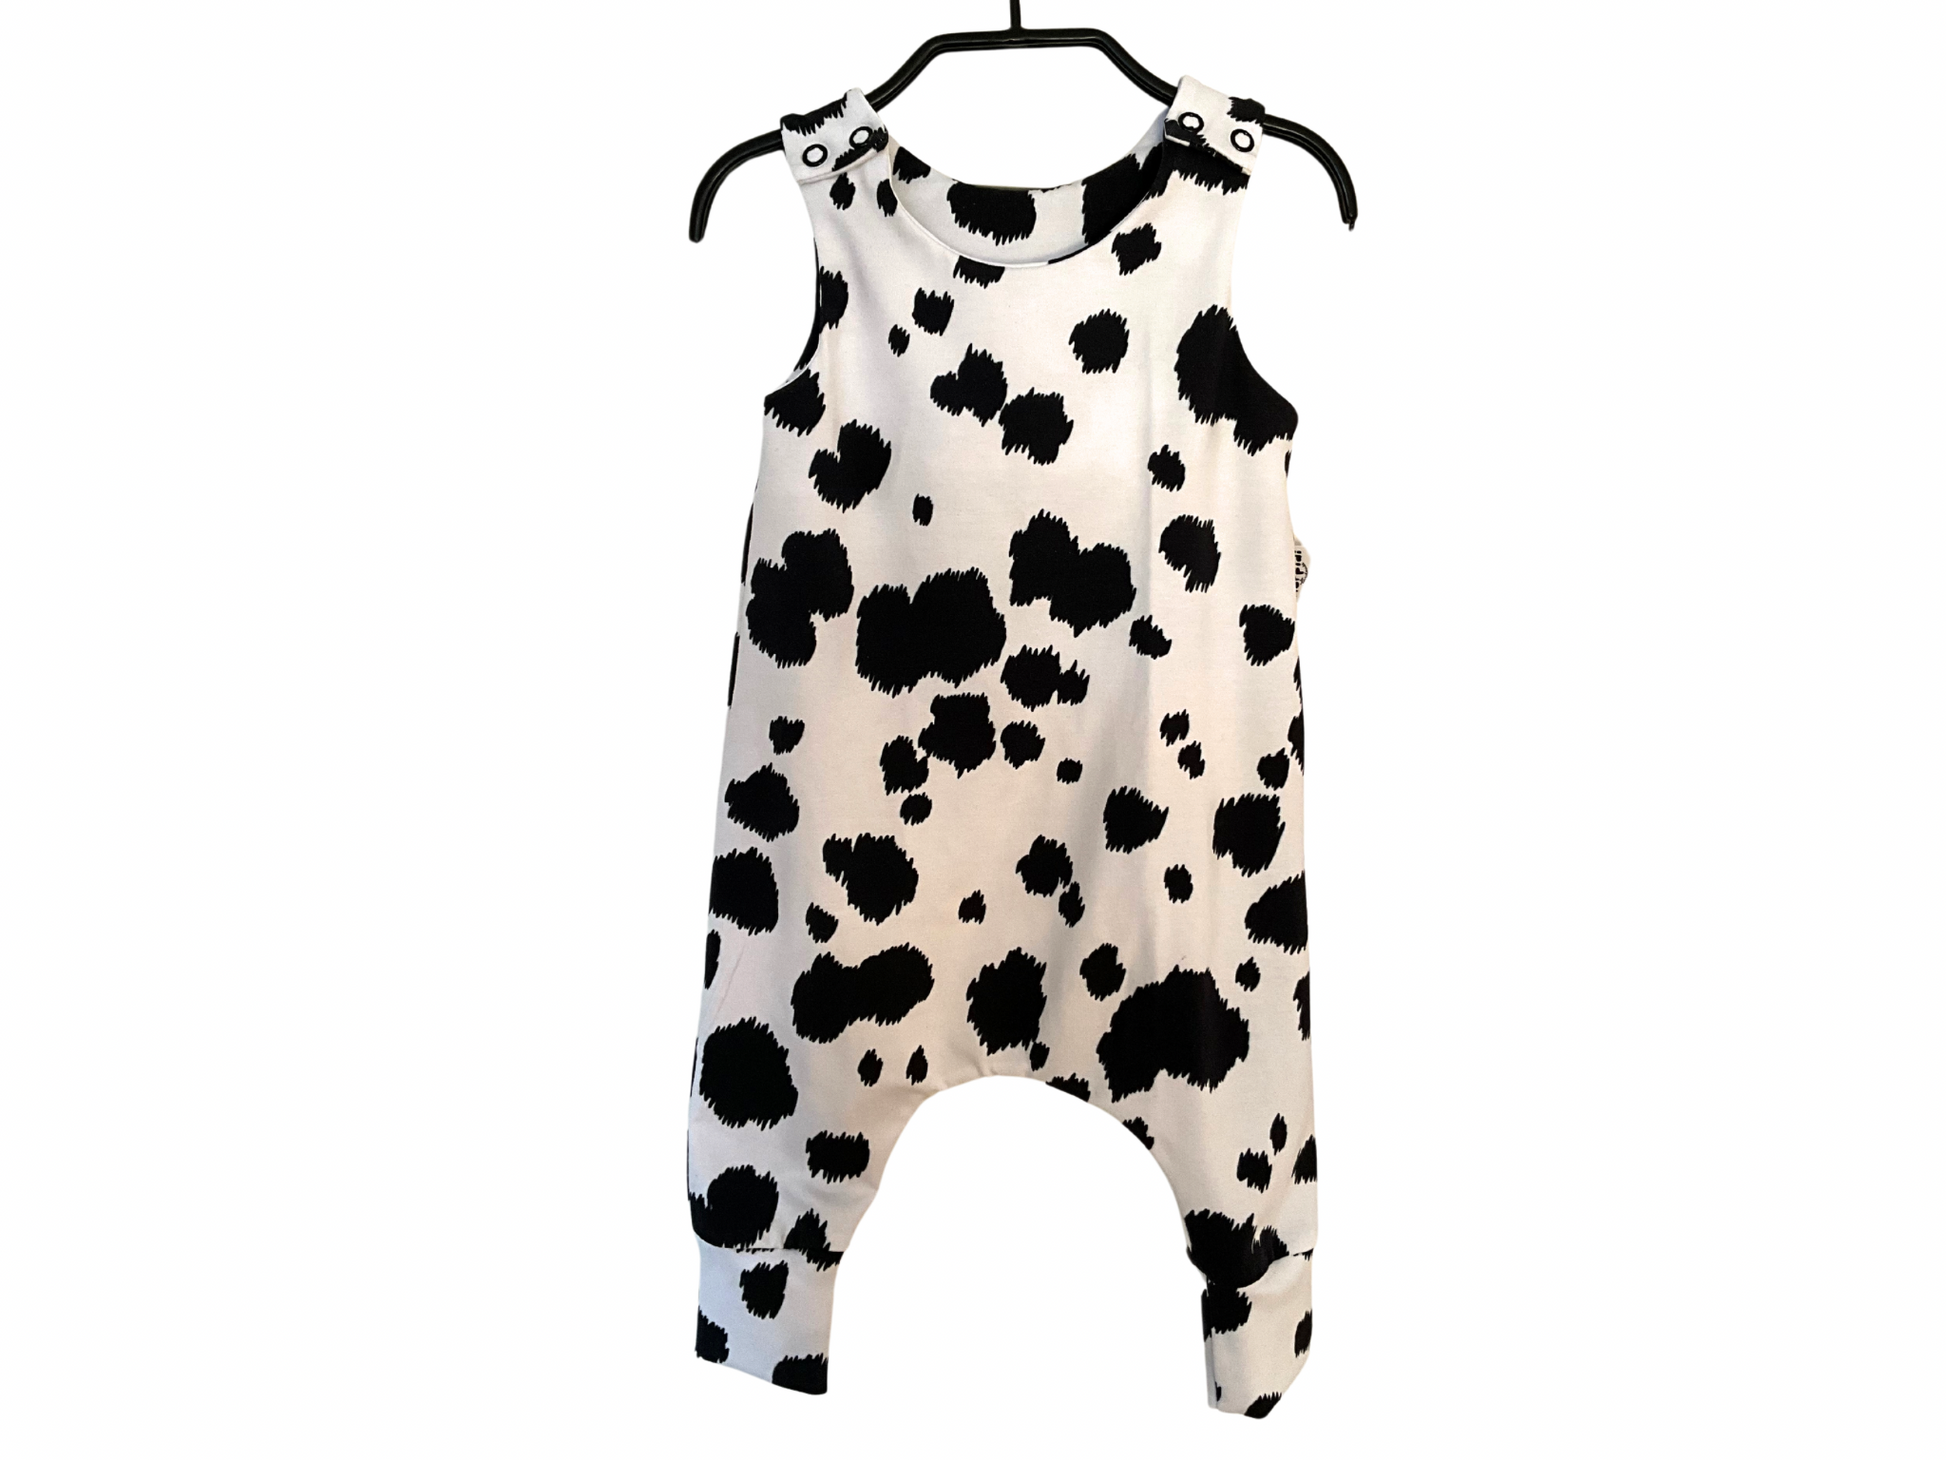 Harem romper with black and white dots print